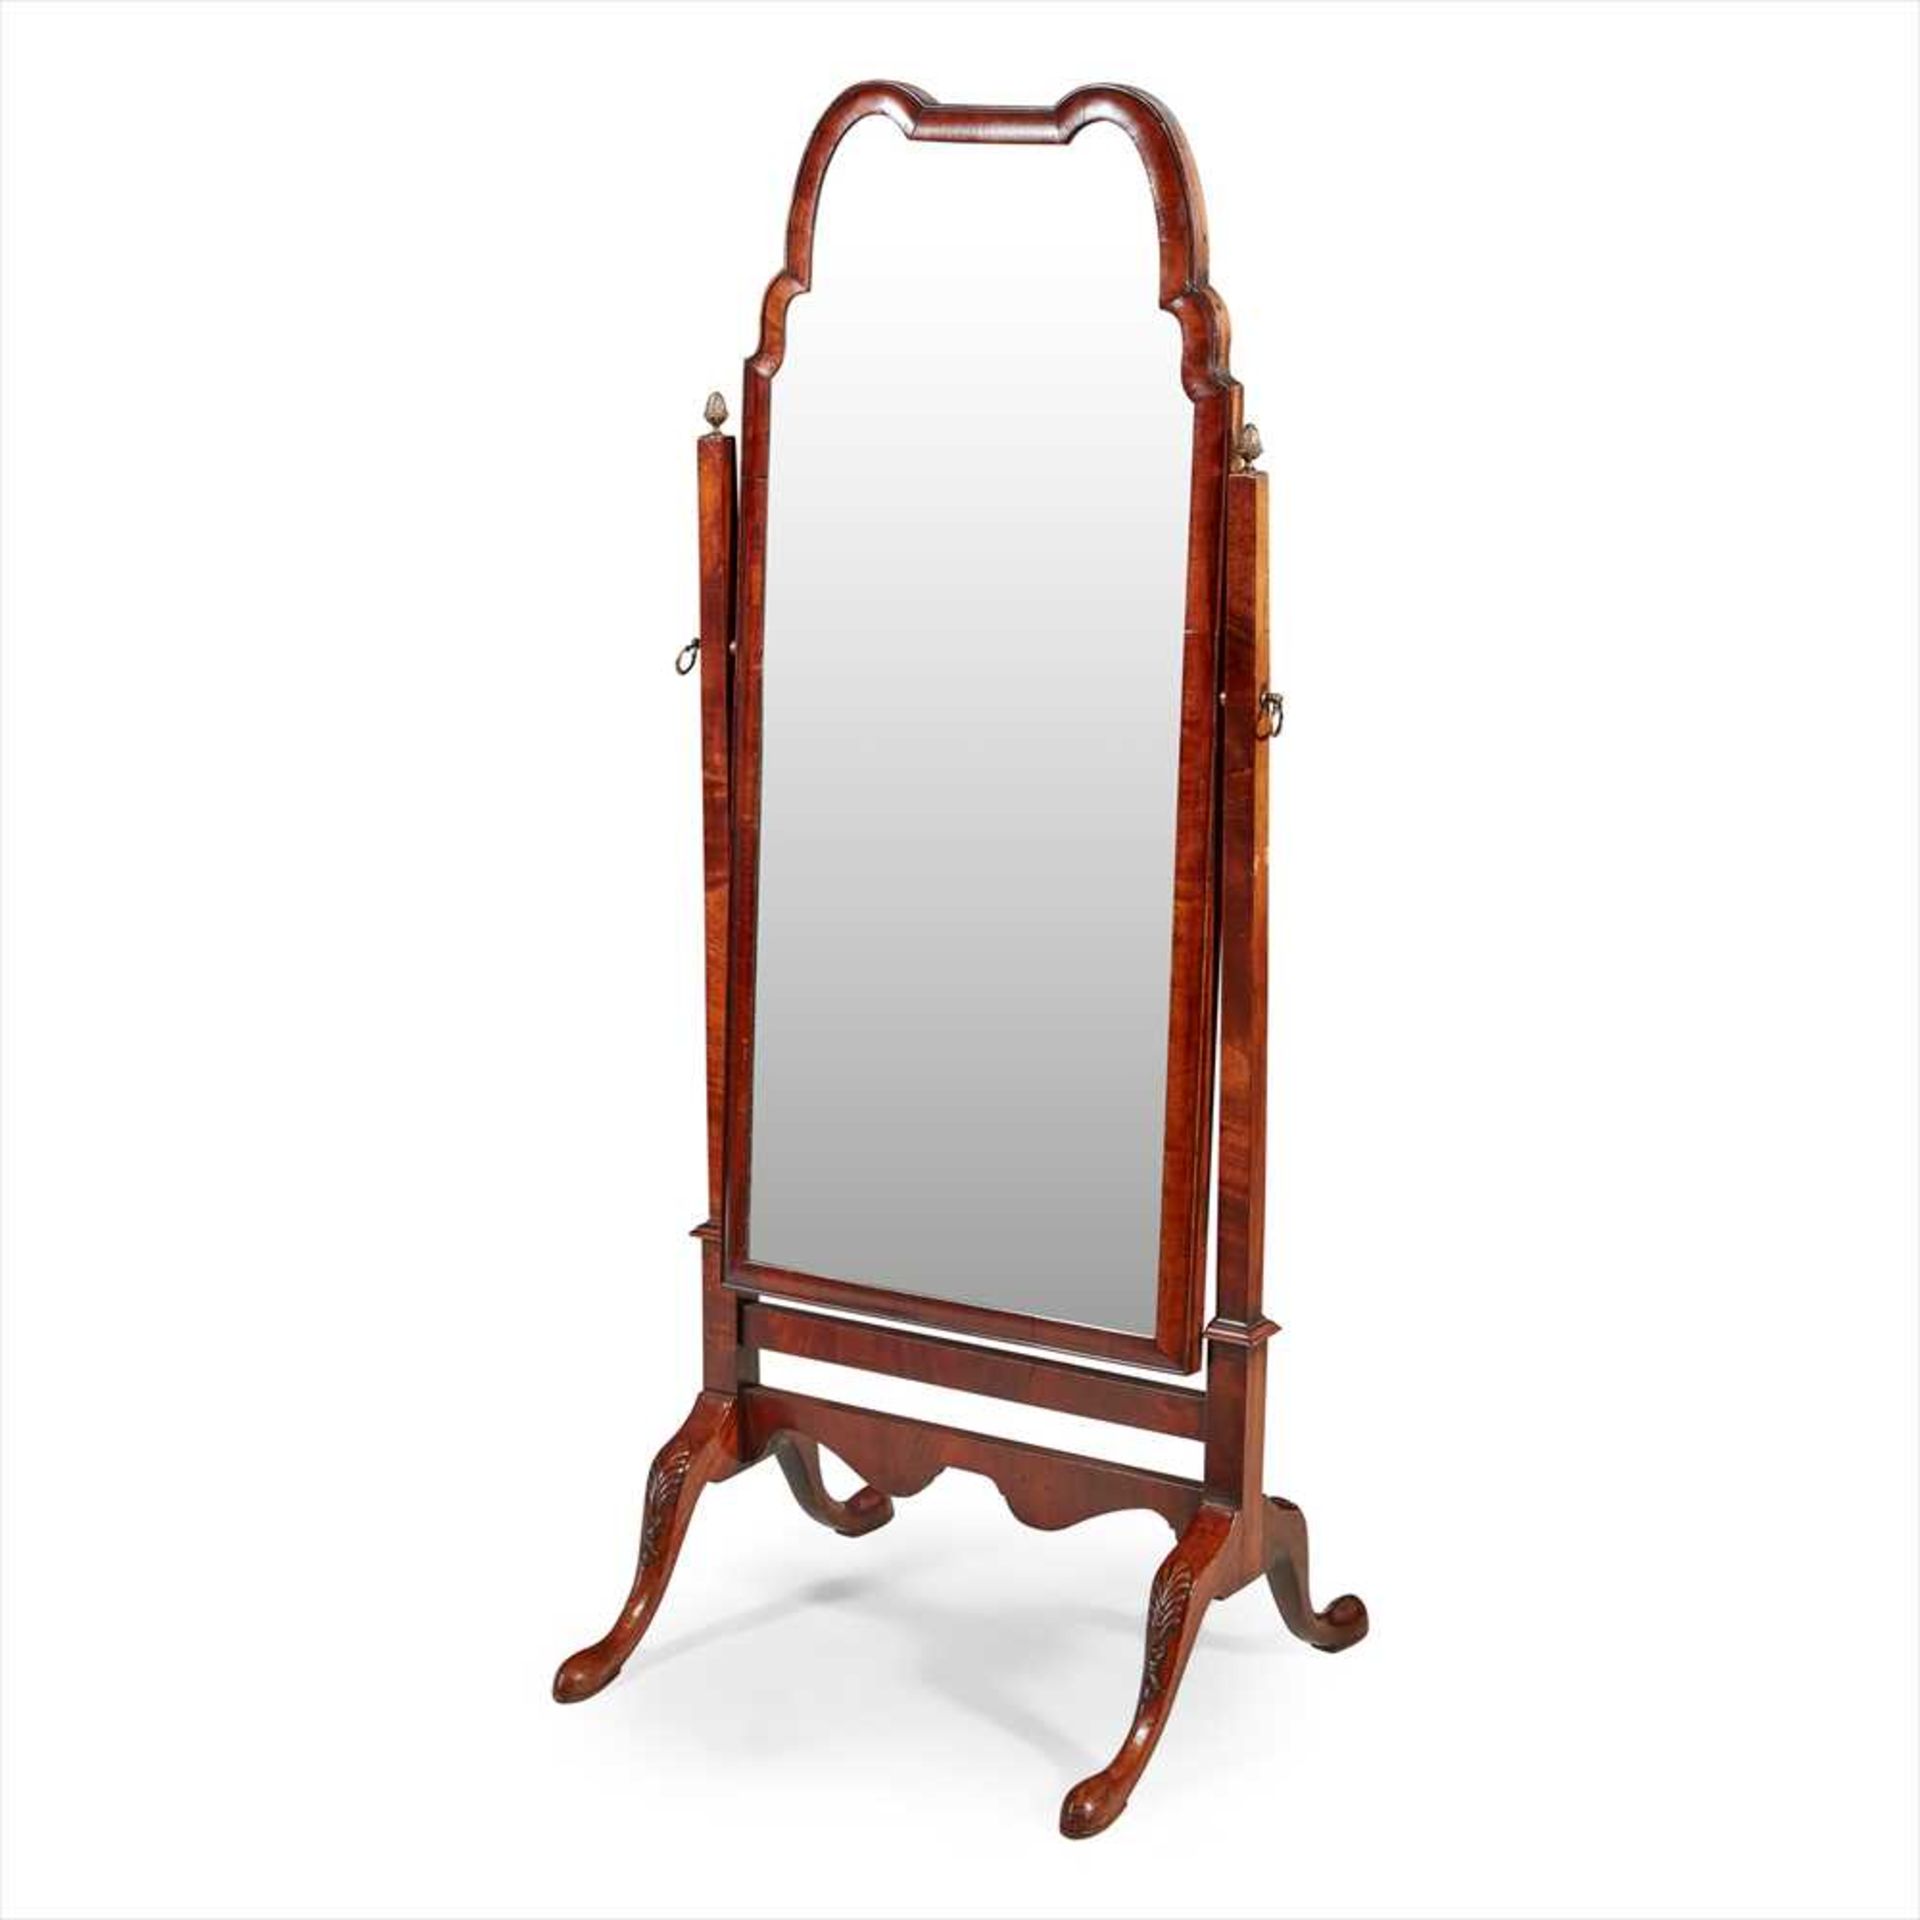 QUEEN ANNE STYLE MAHOGANY CHEVAL MIRROR EARLY 20TH CENTURY